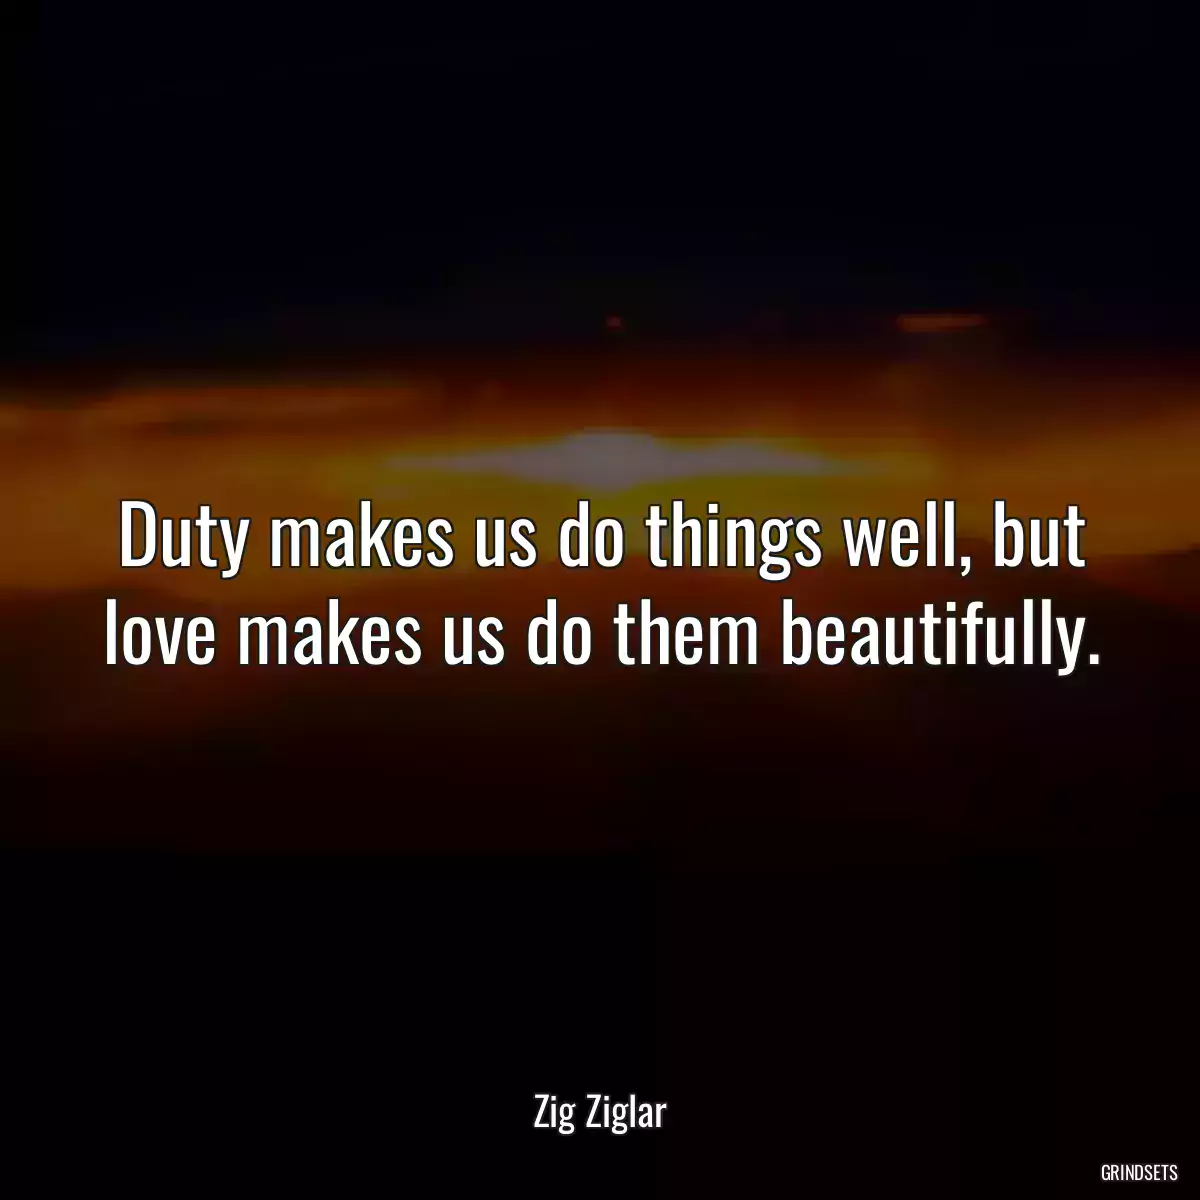 Duty makes us do things well, but love makes us do them beautifully.